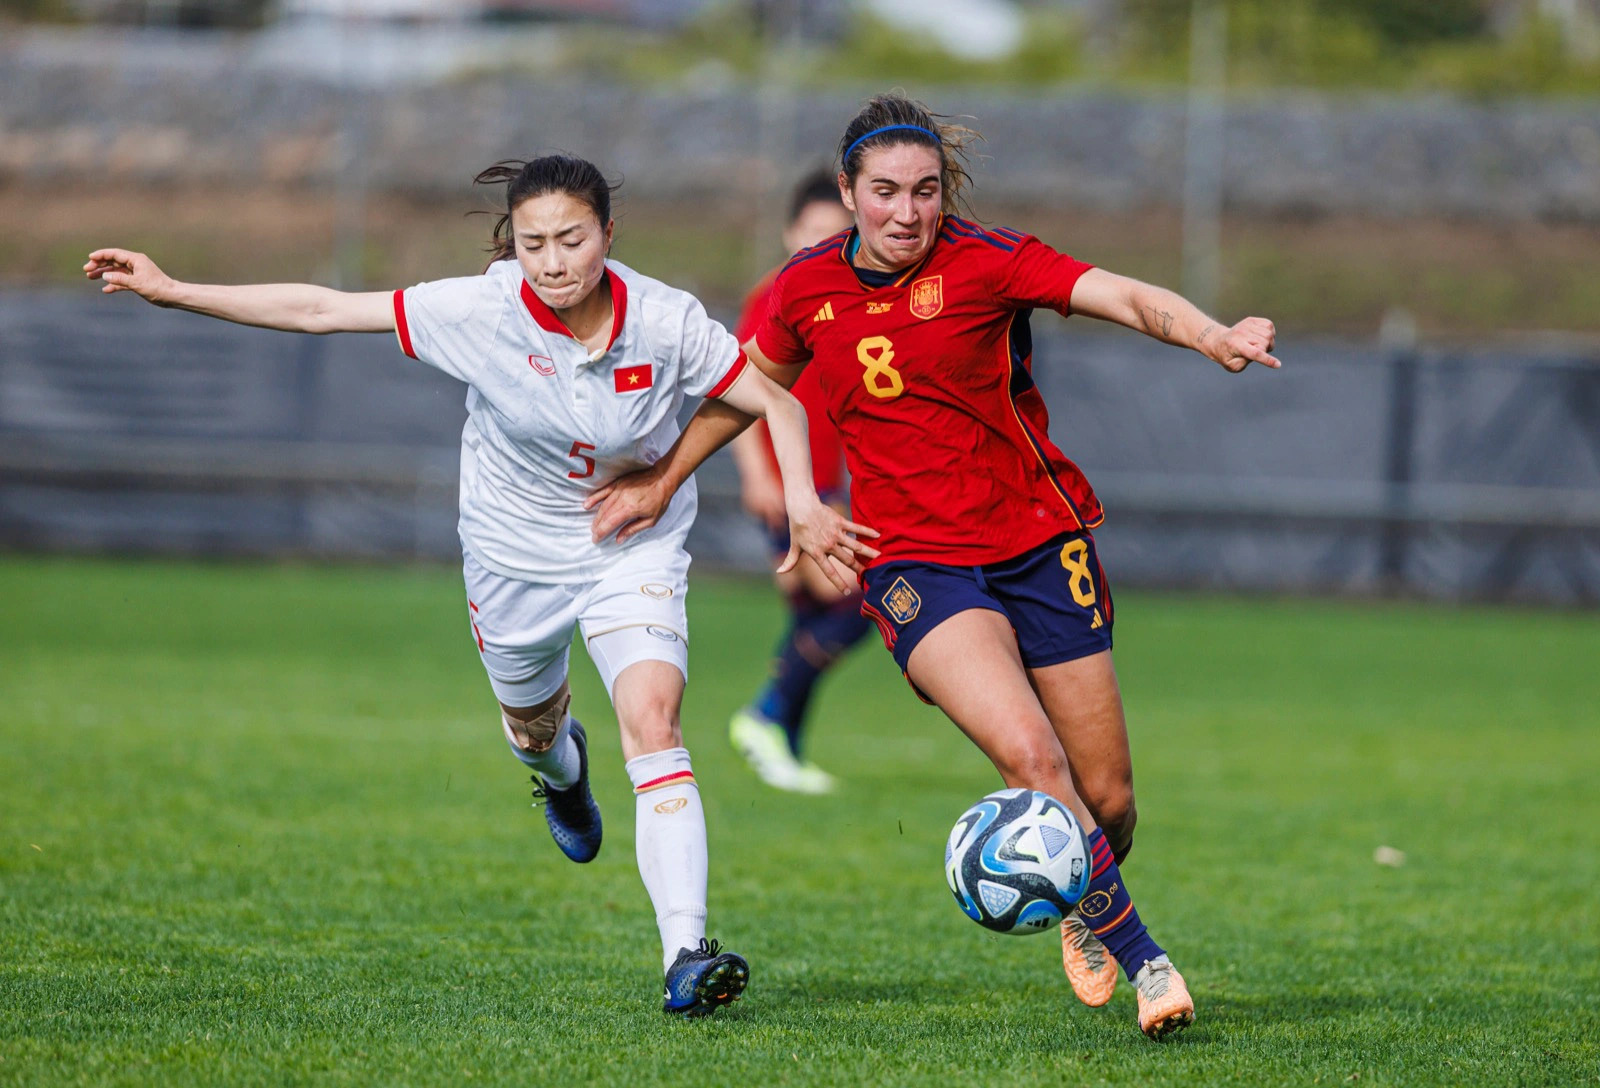 Vietnam suffer 0-9 defeat against Spain in friendly before FIFA Women’s World Cup